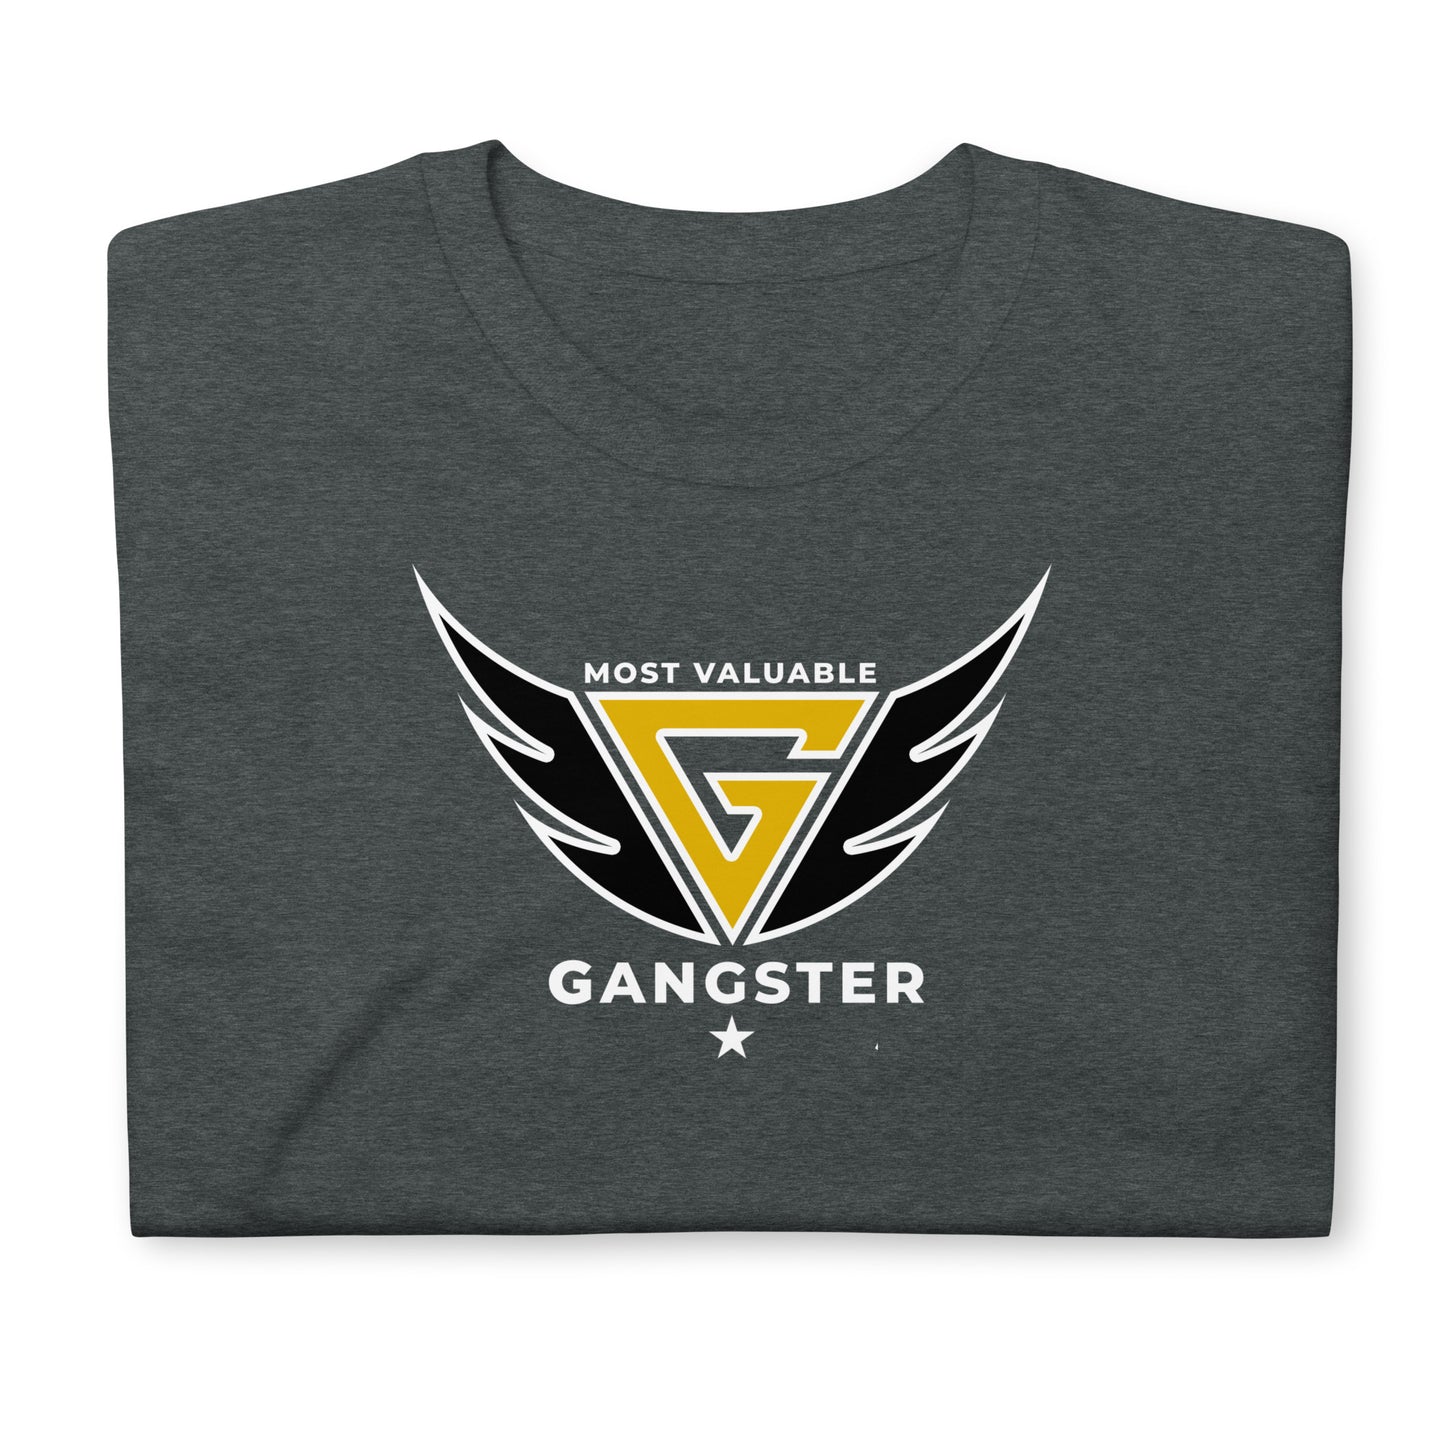 Most Valuable Gangster "MVG" Shirt